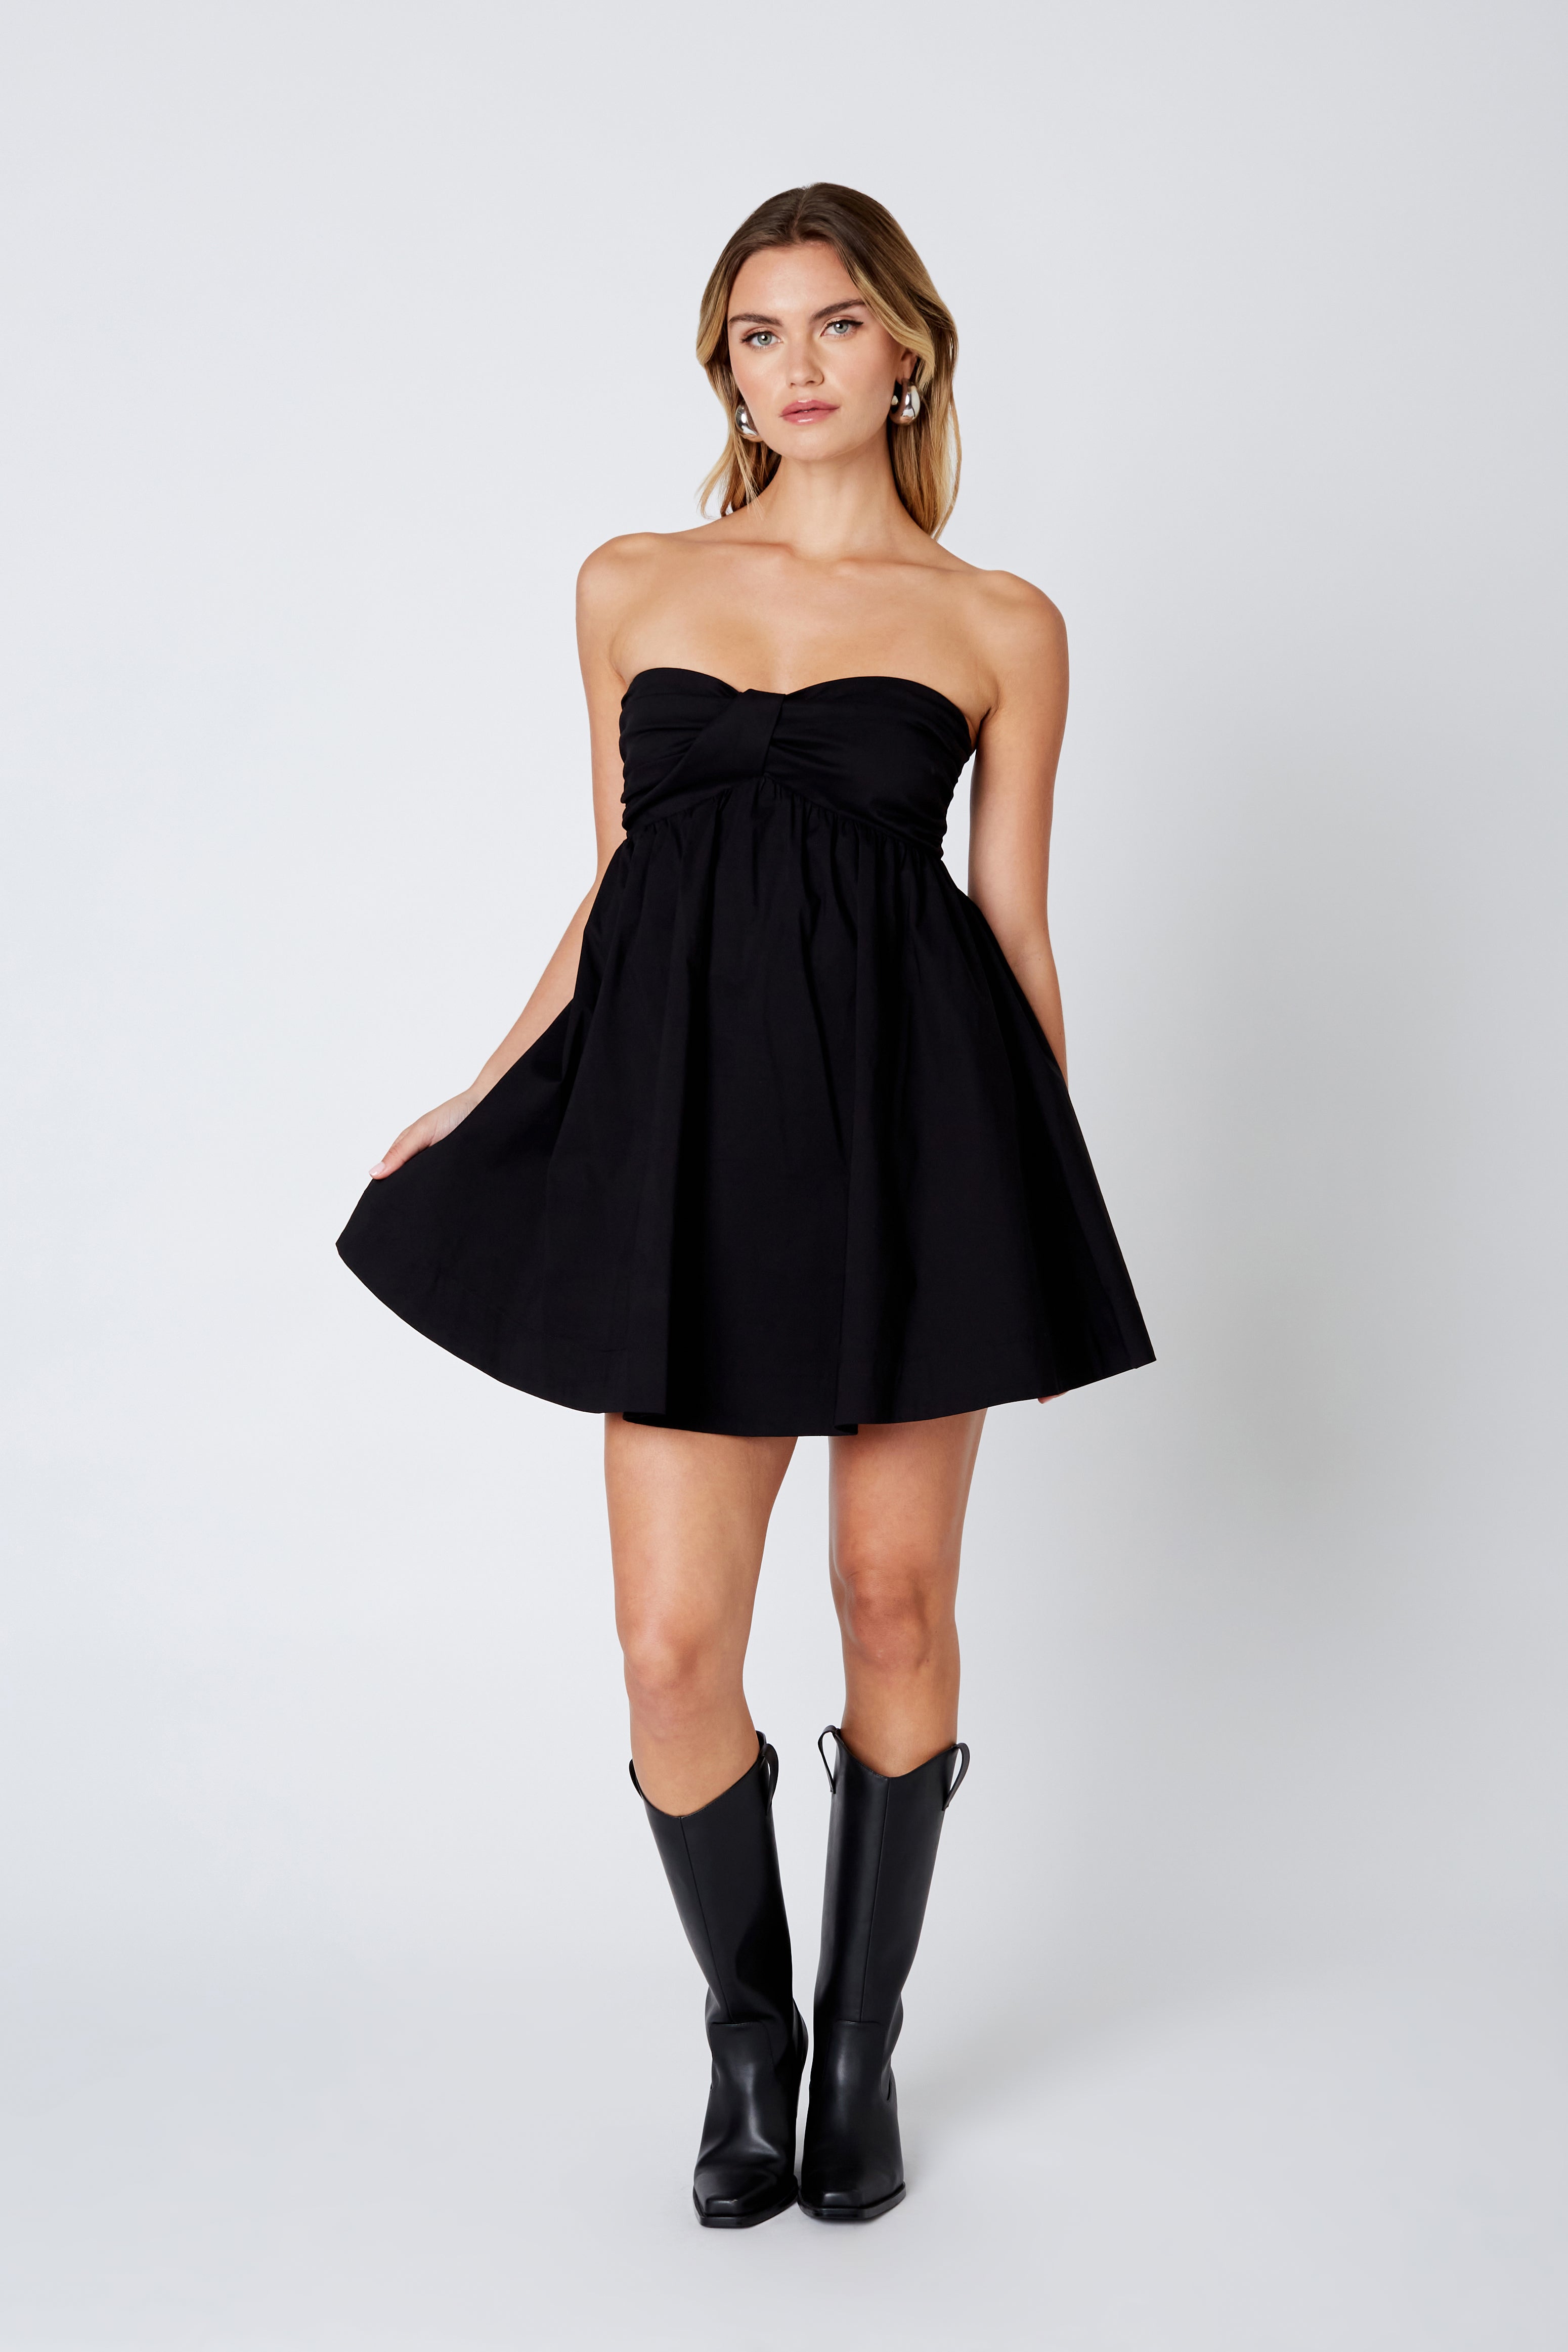 Strapless Babydoll Dress in black front view